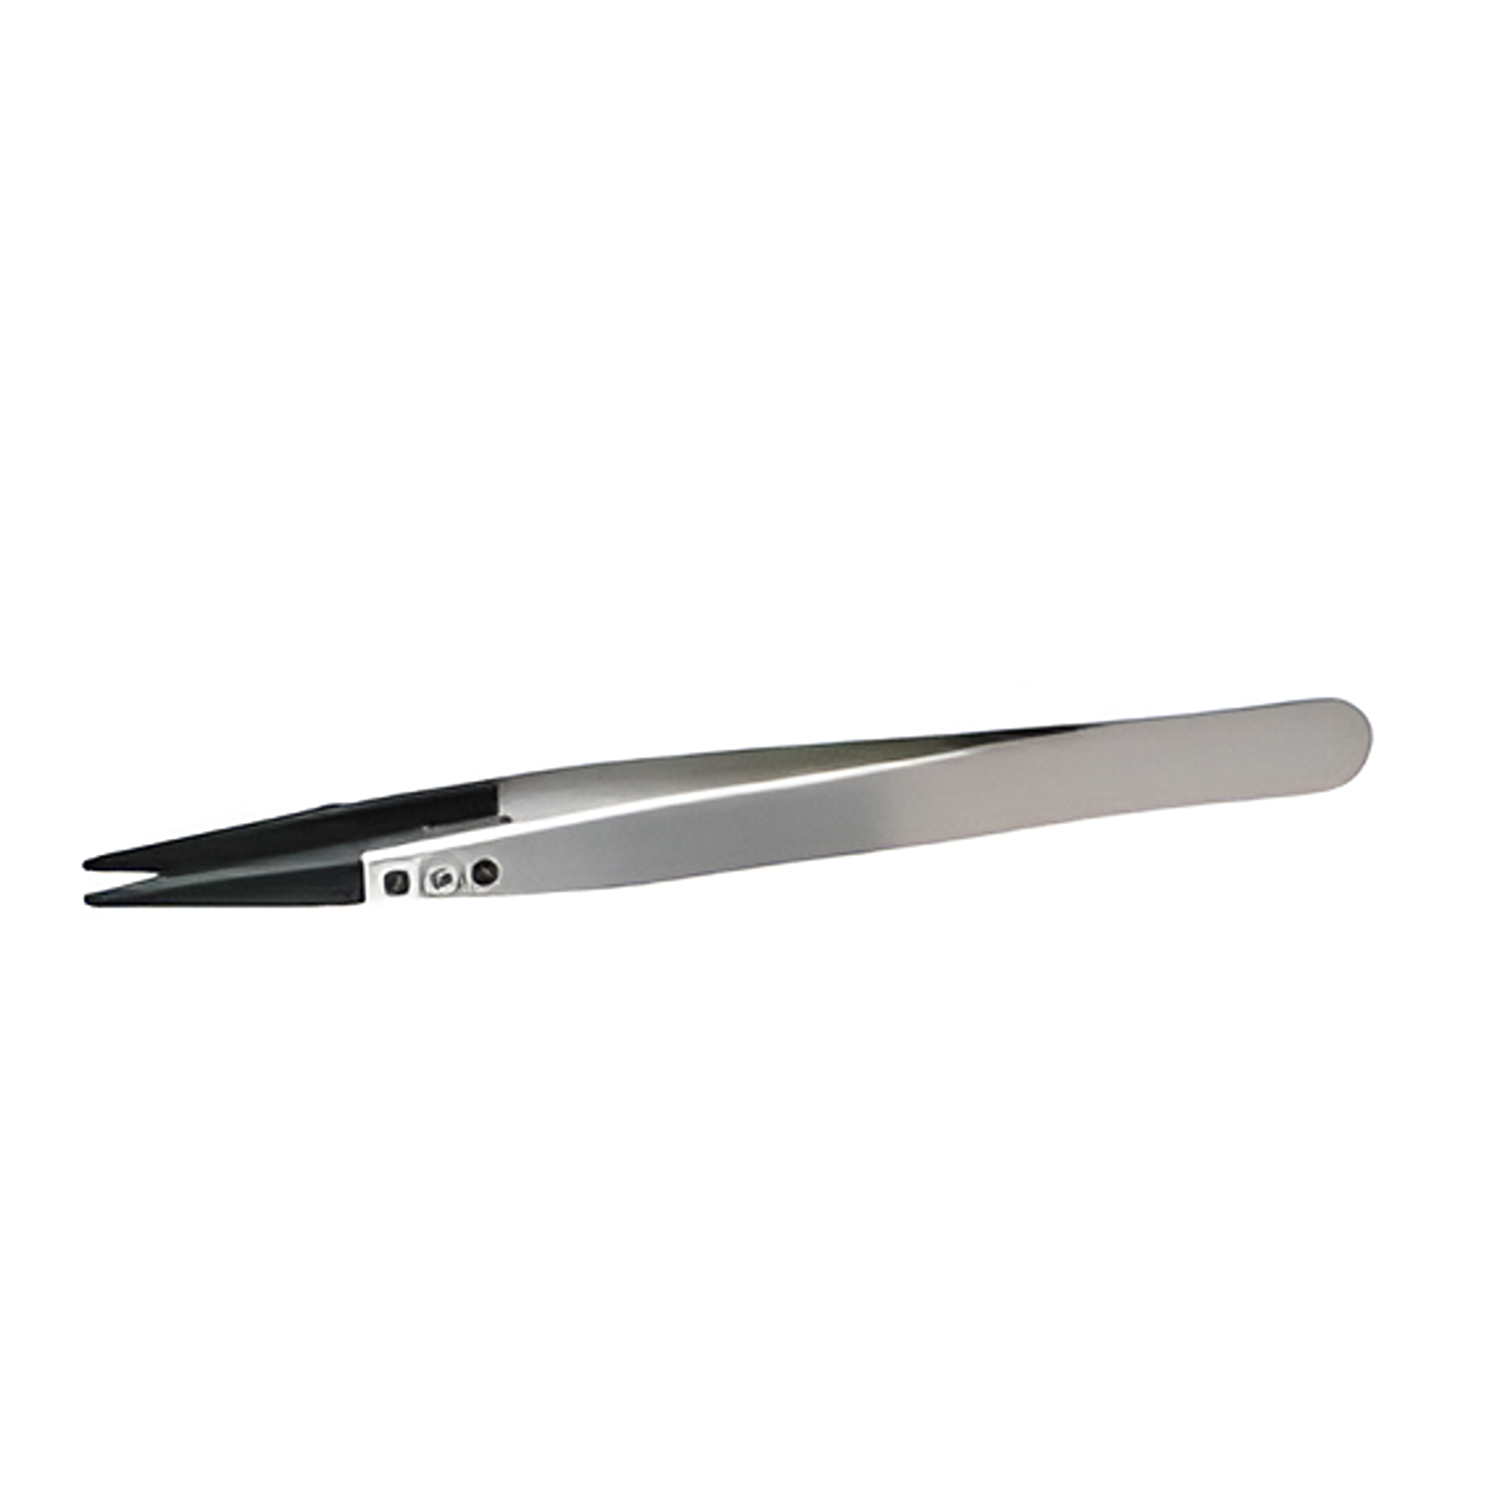 BAHCO TL 249CFR-SA Tweezers with Replaceable Carbon Fibre Tips - Premium Tweezers from BAHCO - Shop now at Yew Aik.